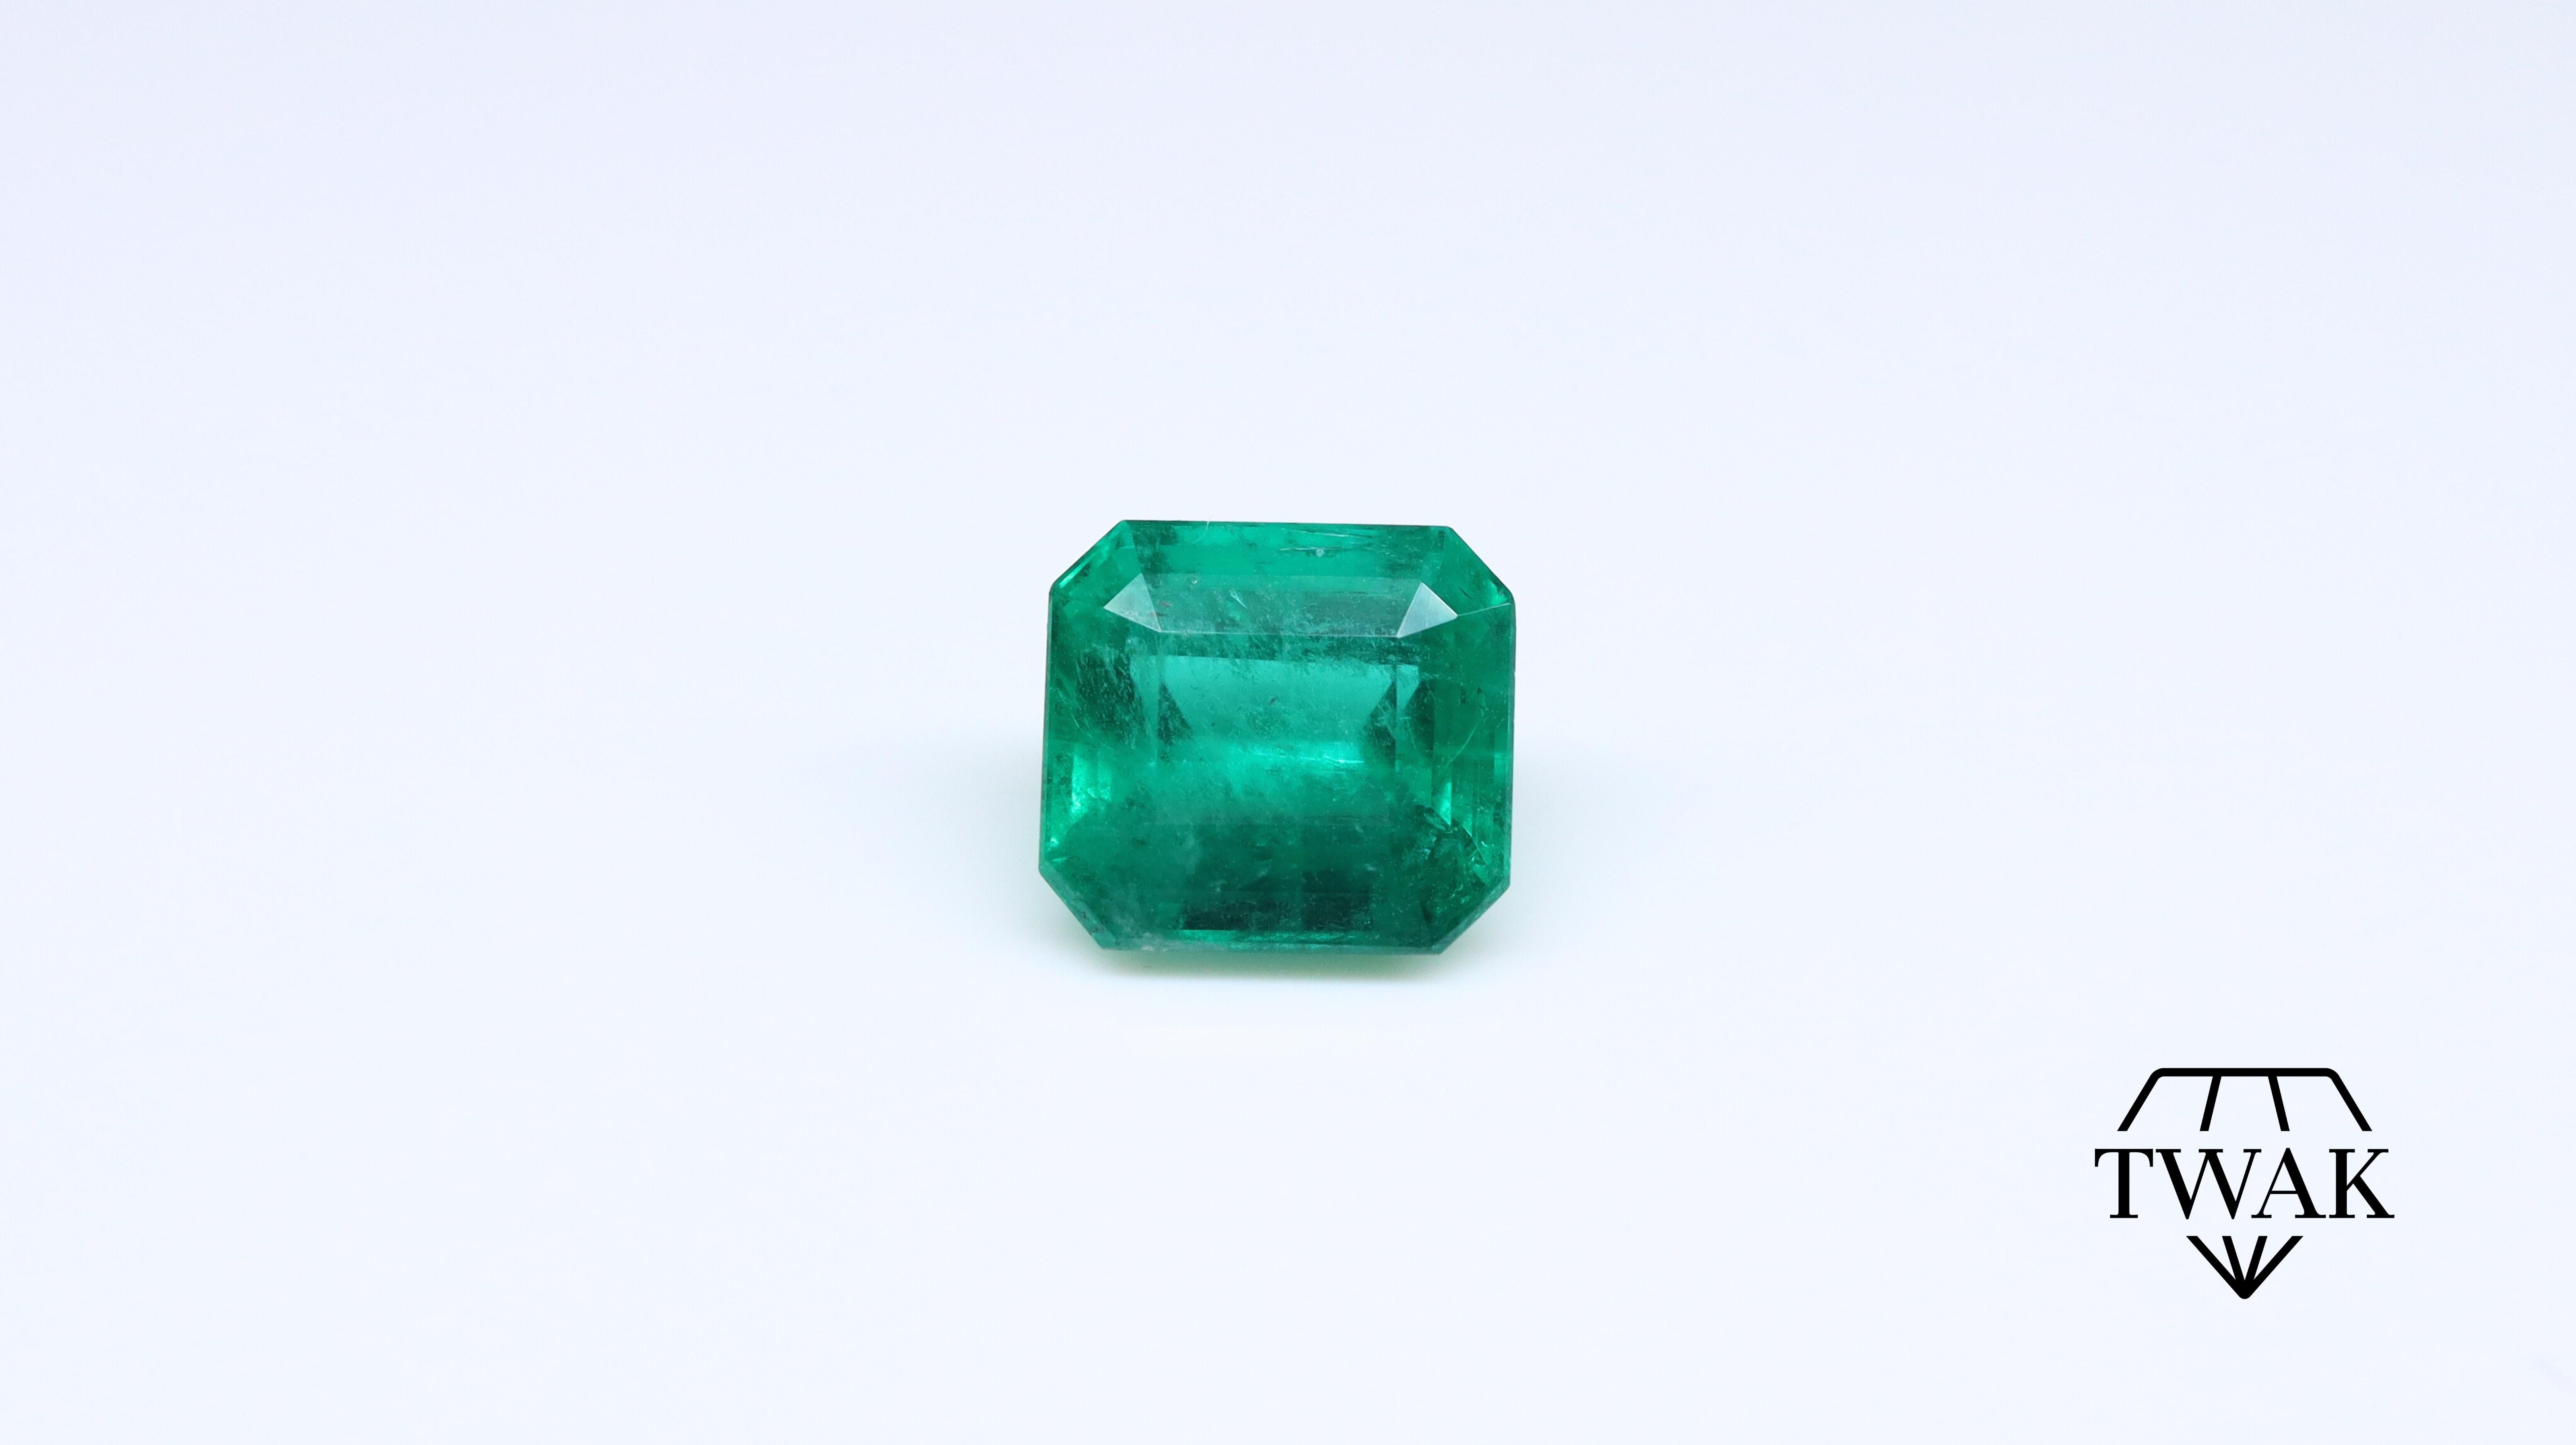 A beautiful Emerald with excellent color, crystal, and saturation.

Details and description:
Dimensions: 8.08 x 8.72 x 5.73 mm
Weight: 2.79ct
Color: Intense / Deep Green 
Treatment: Opticom

Emeralds are naturally porous and inclusive stones, with